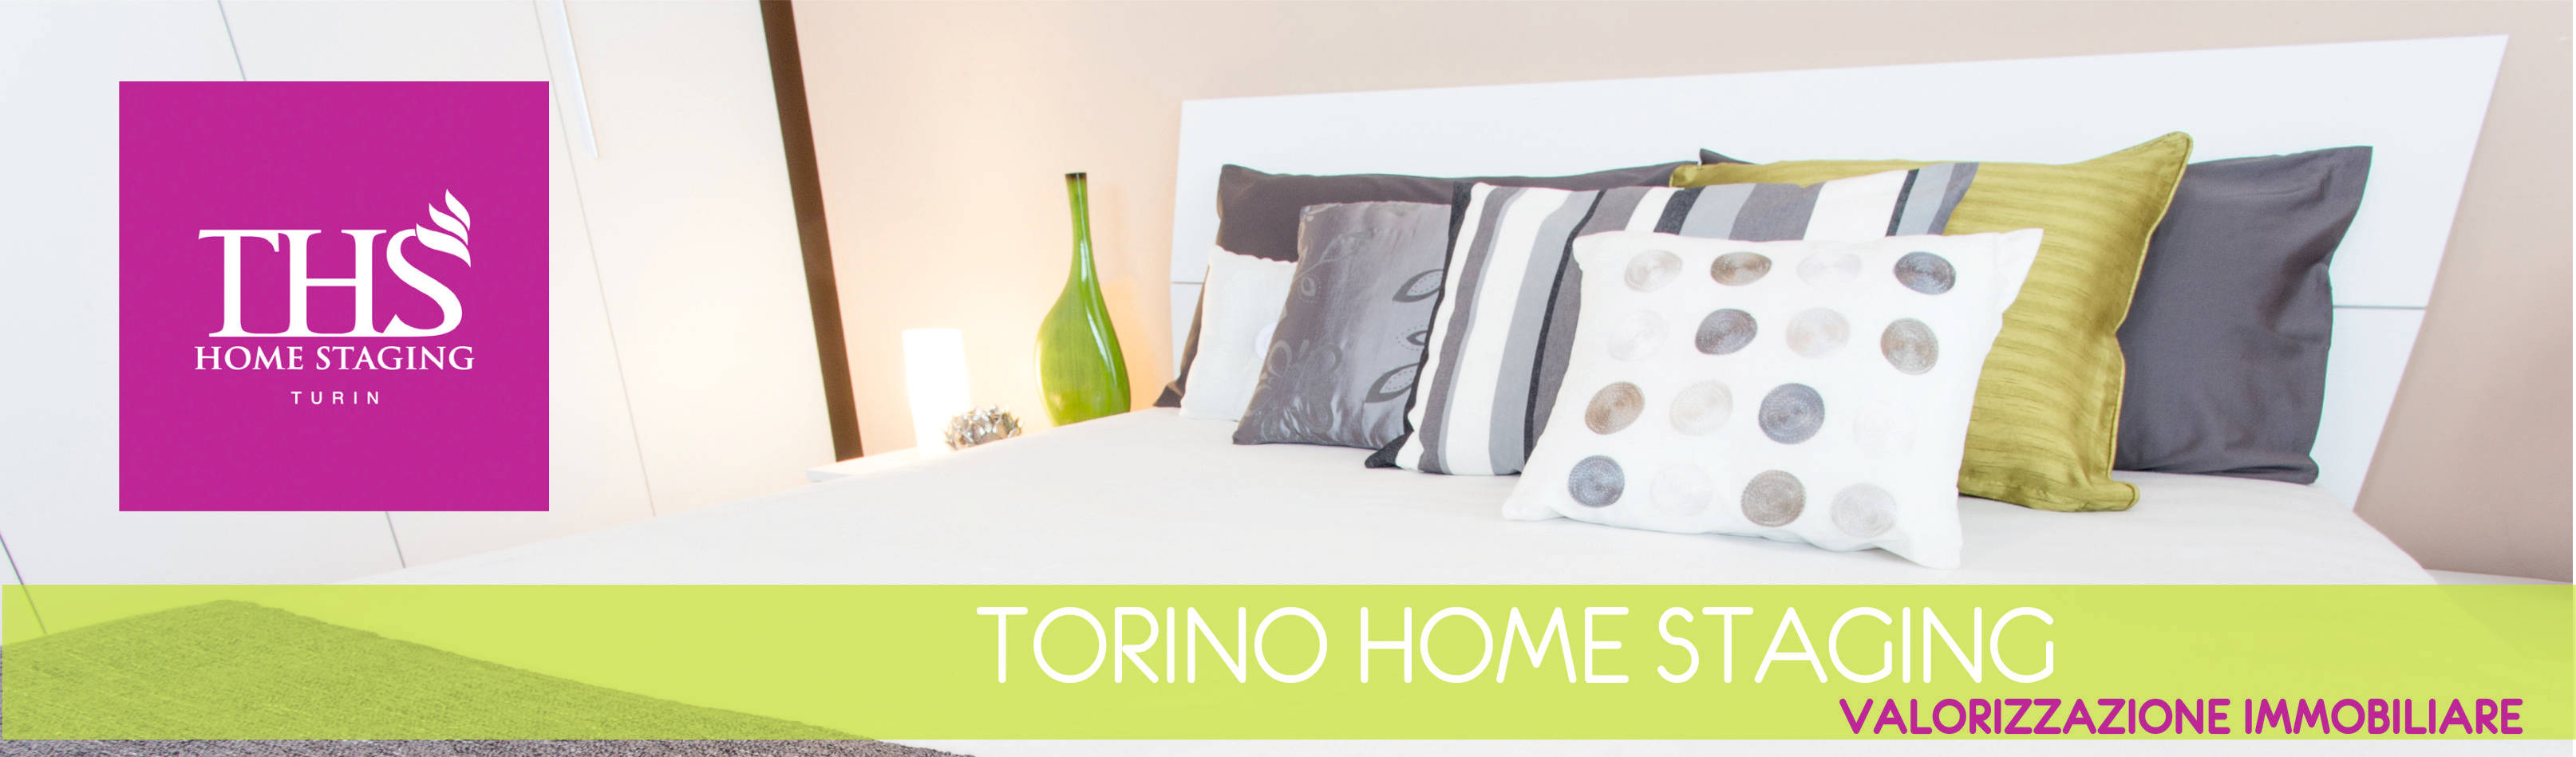 THS Torino Home Staging